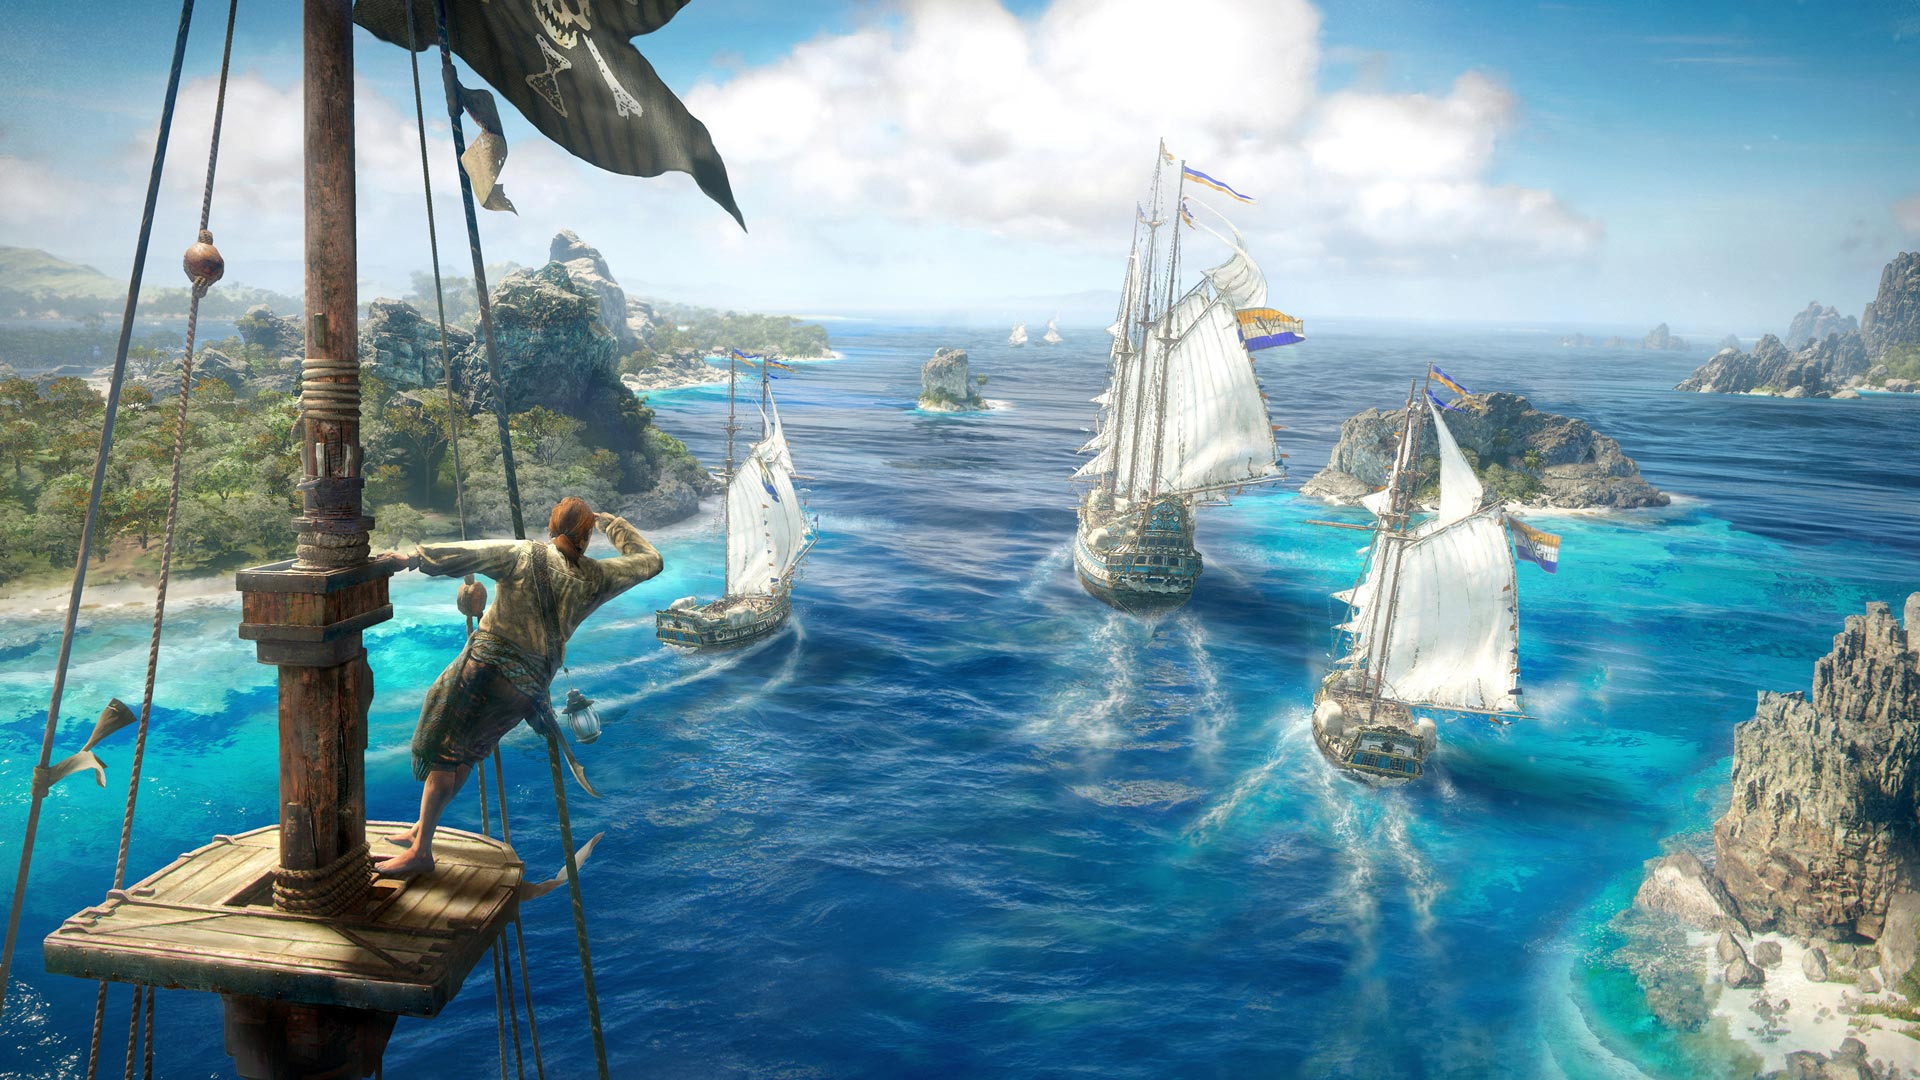 Skull And Bones' Closed Beta: 10 Things To Expect In Ubisoft's Delayed  Pirate Fantasy